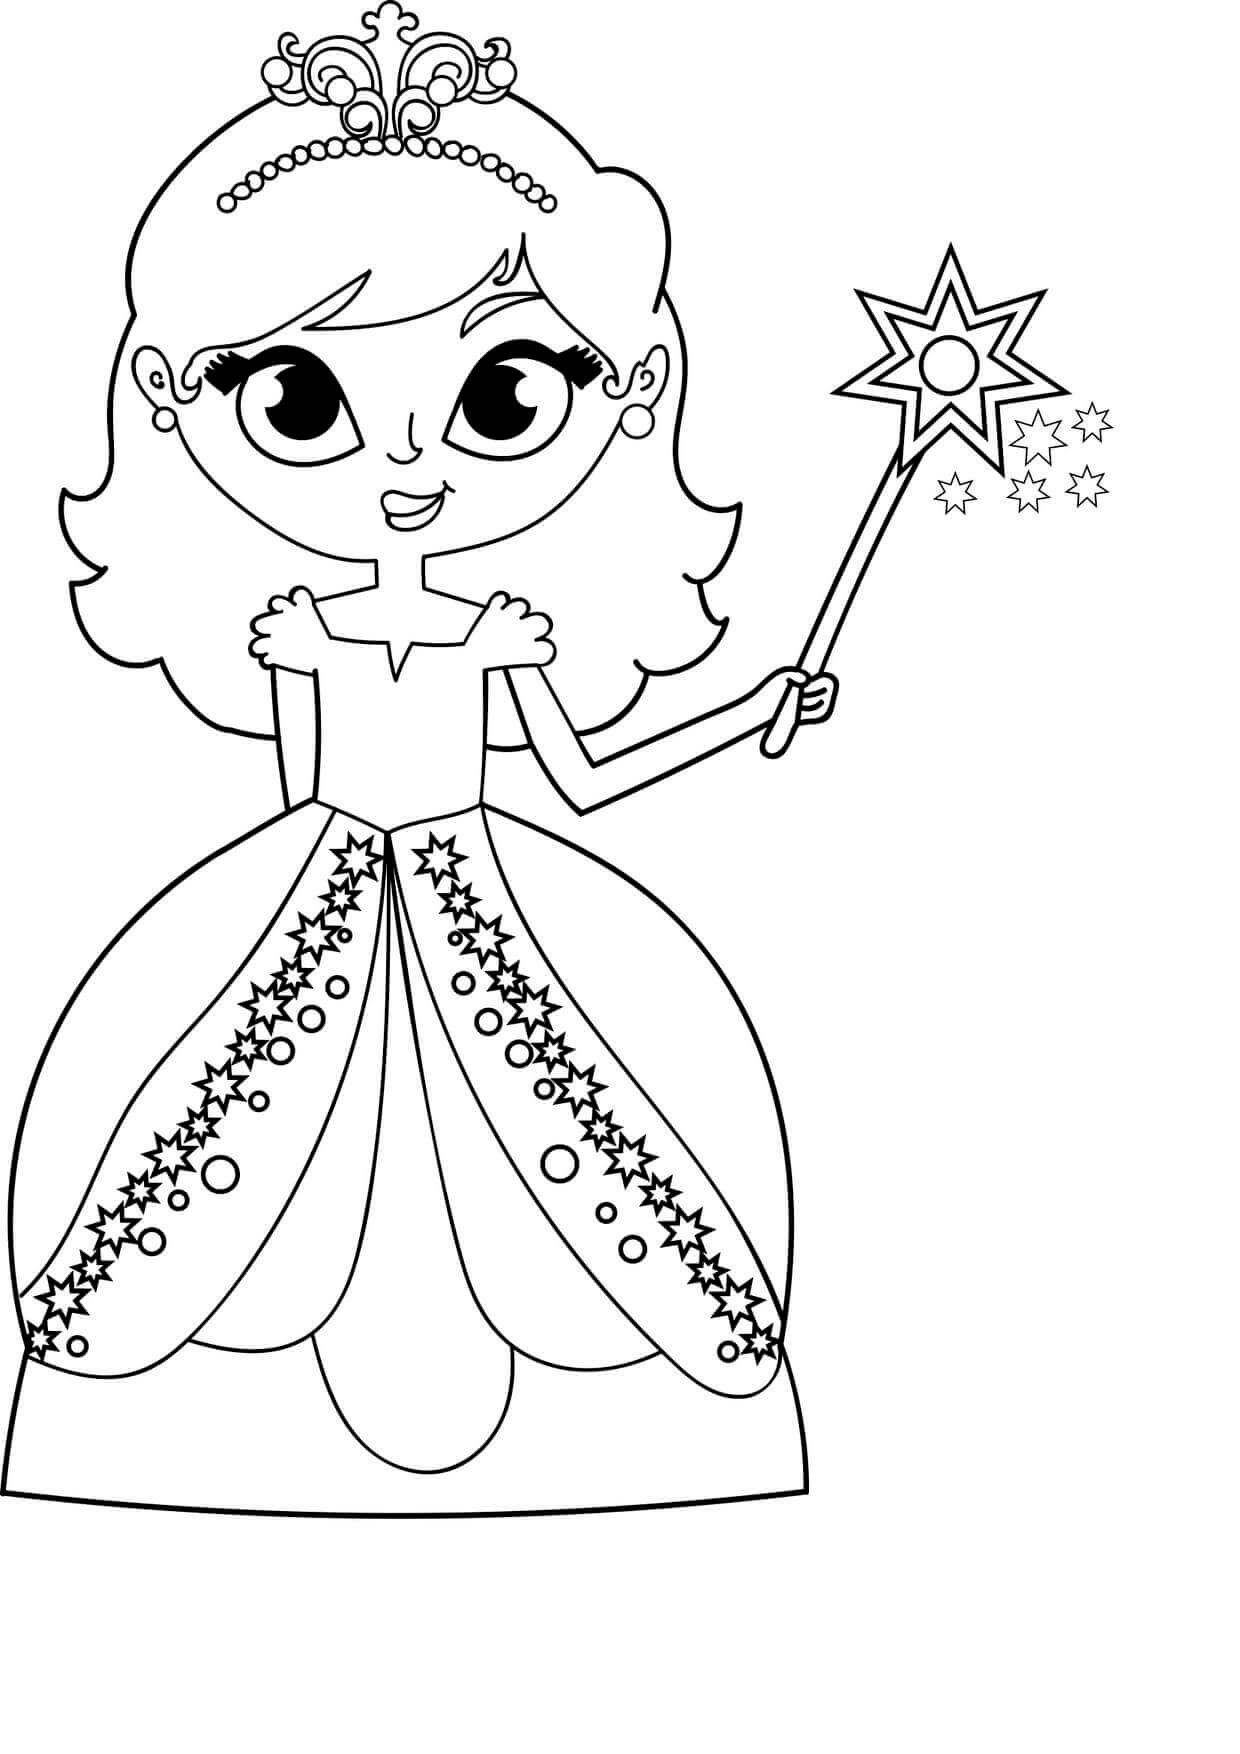 Coloring Sheets For Girls
 Free Printable Coloring Pages For Girls